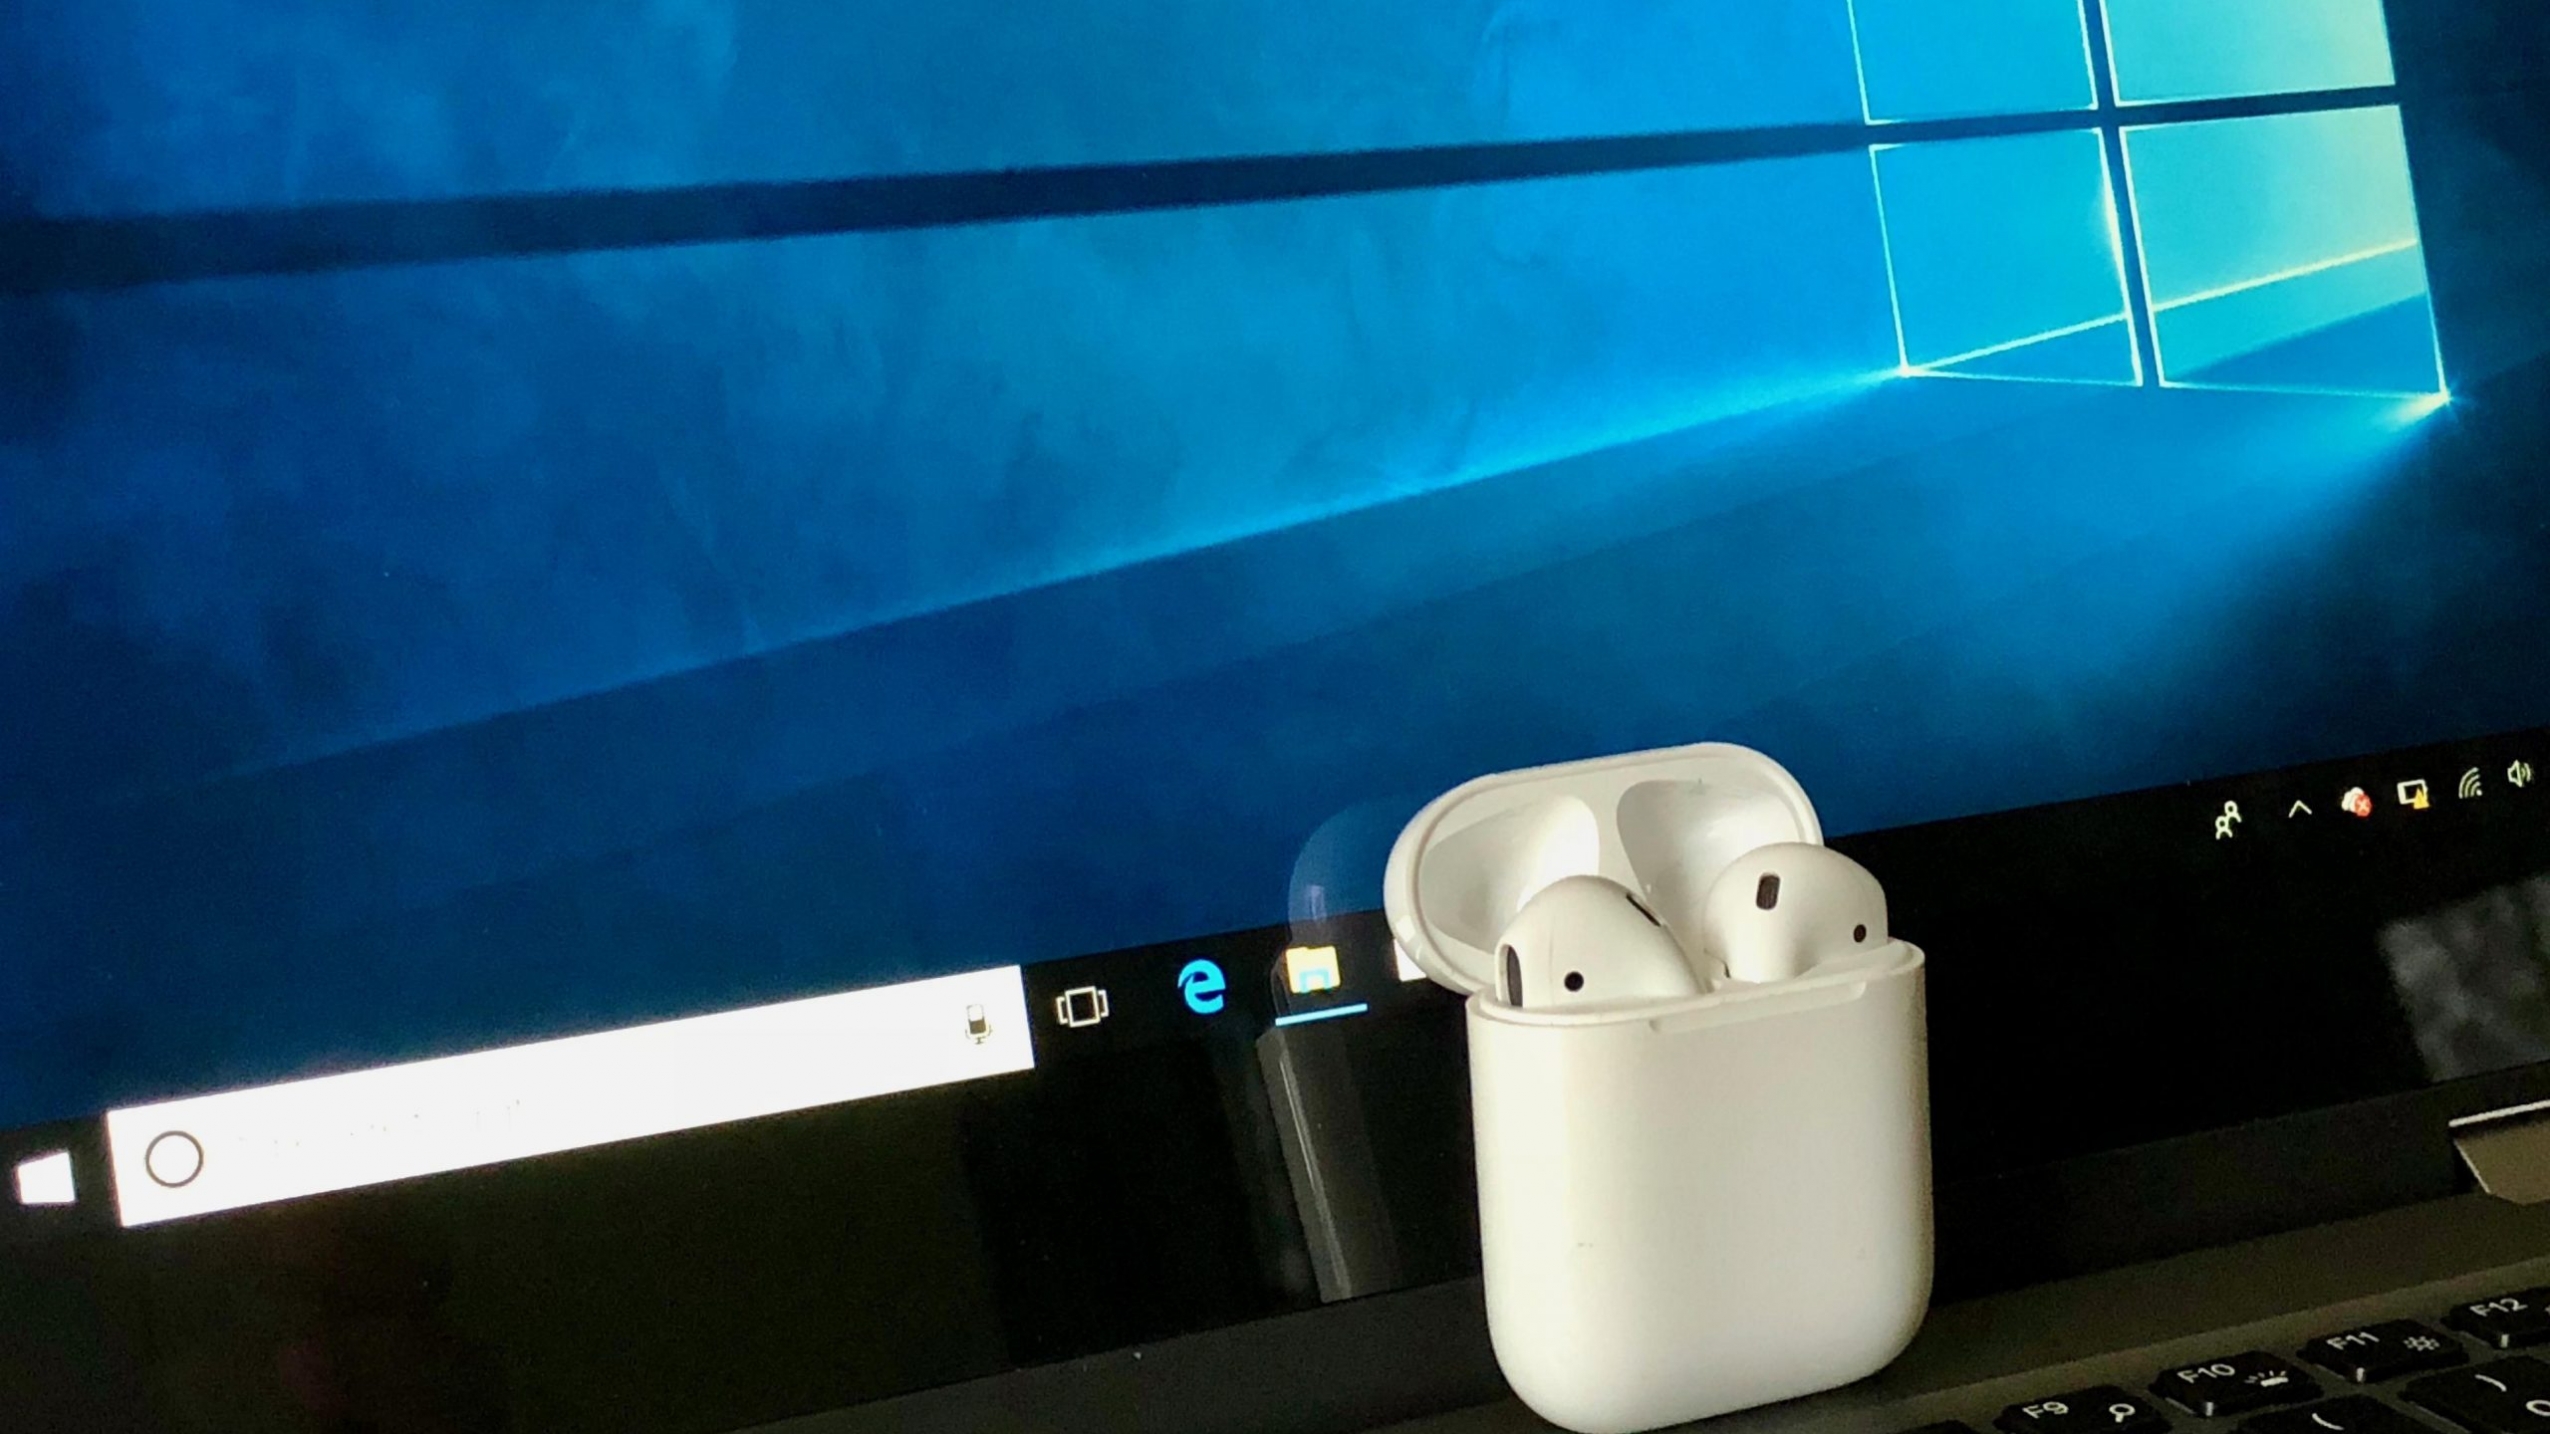 Airpods connected to a laptop